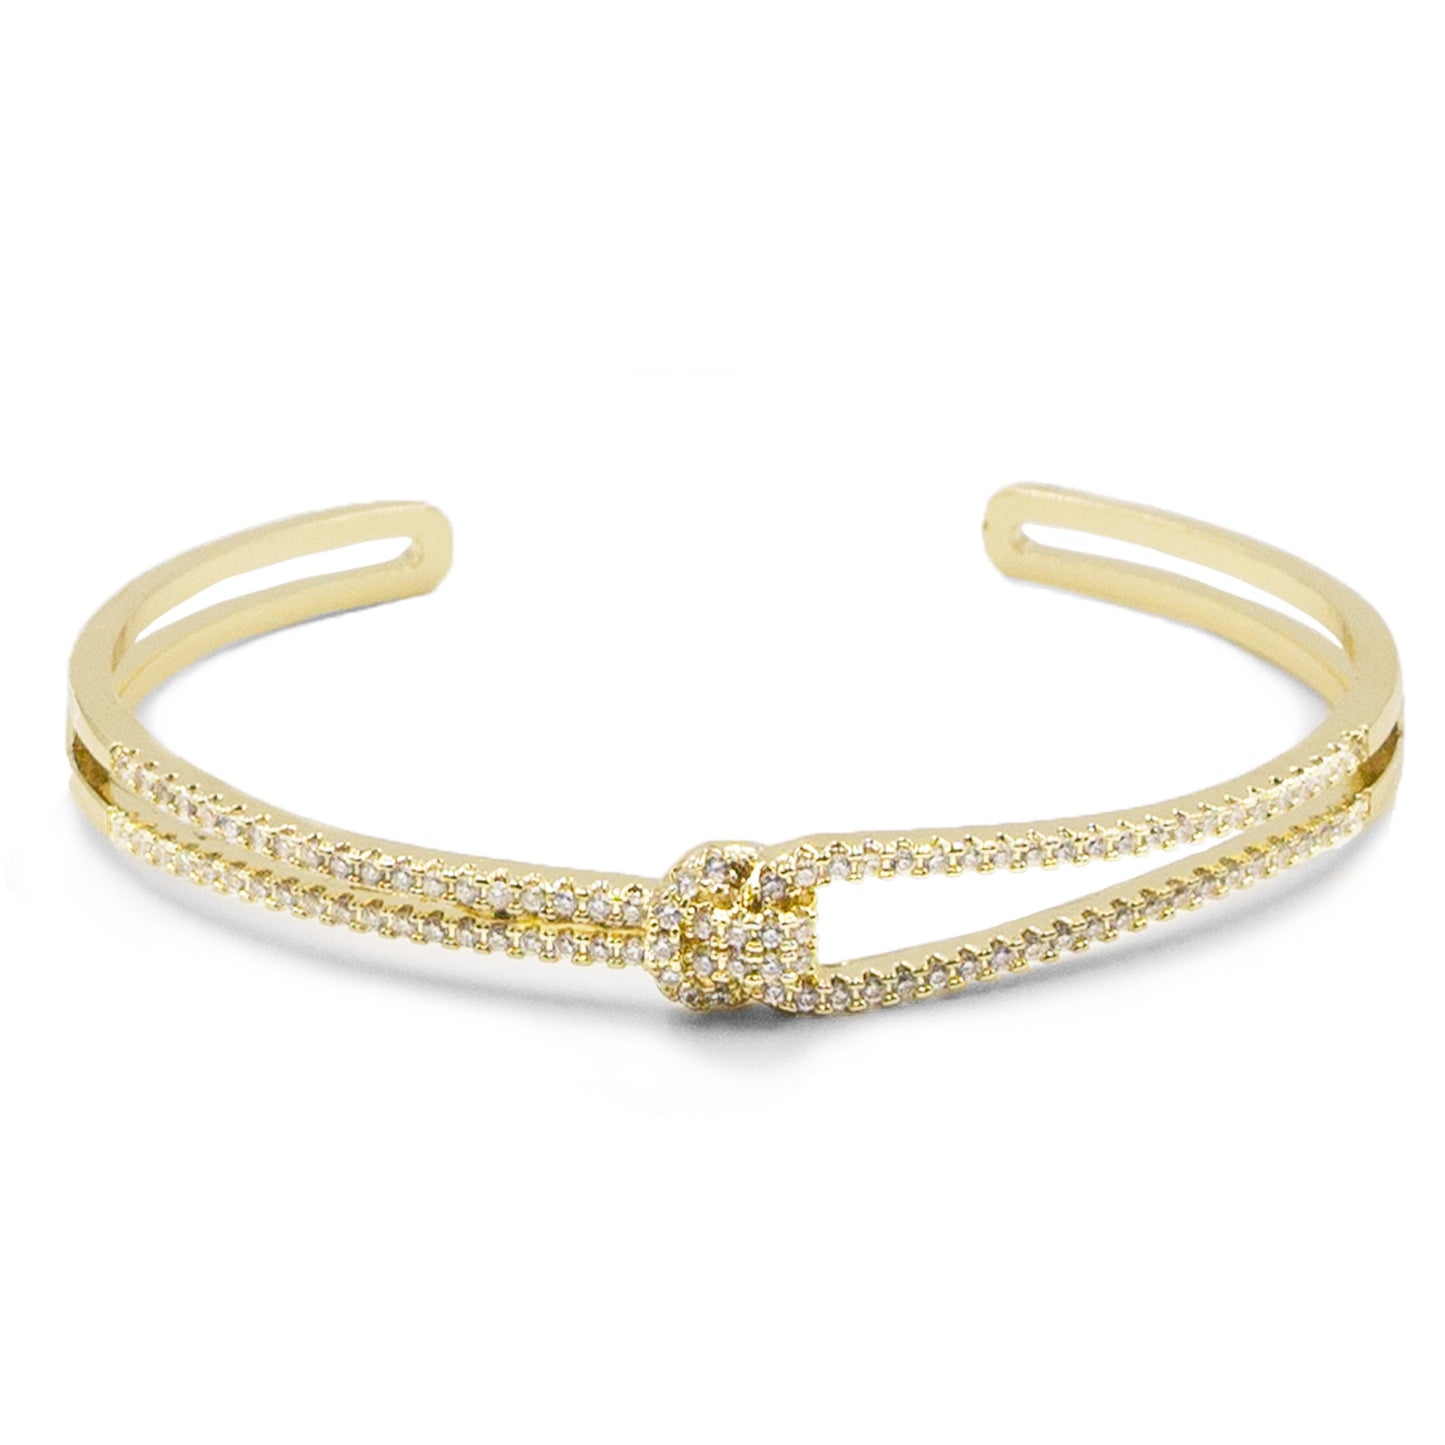 Canute Collection - Bling Bracelet